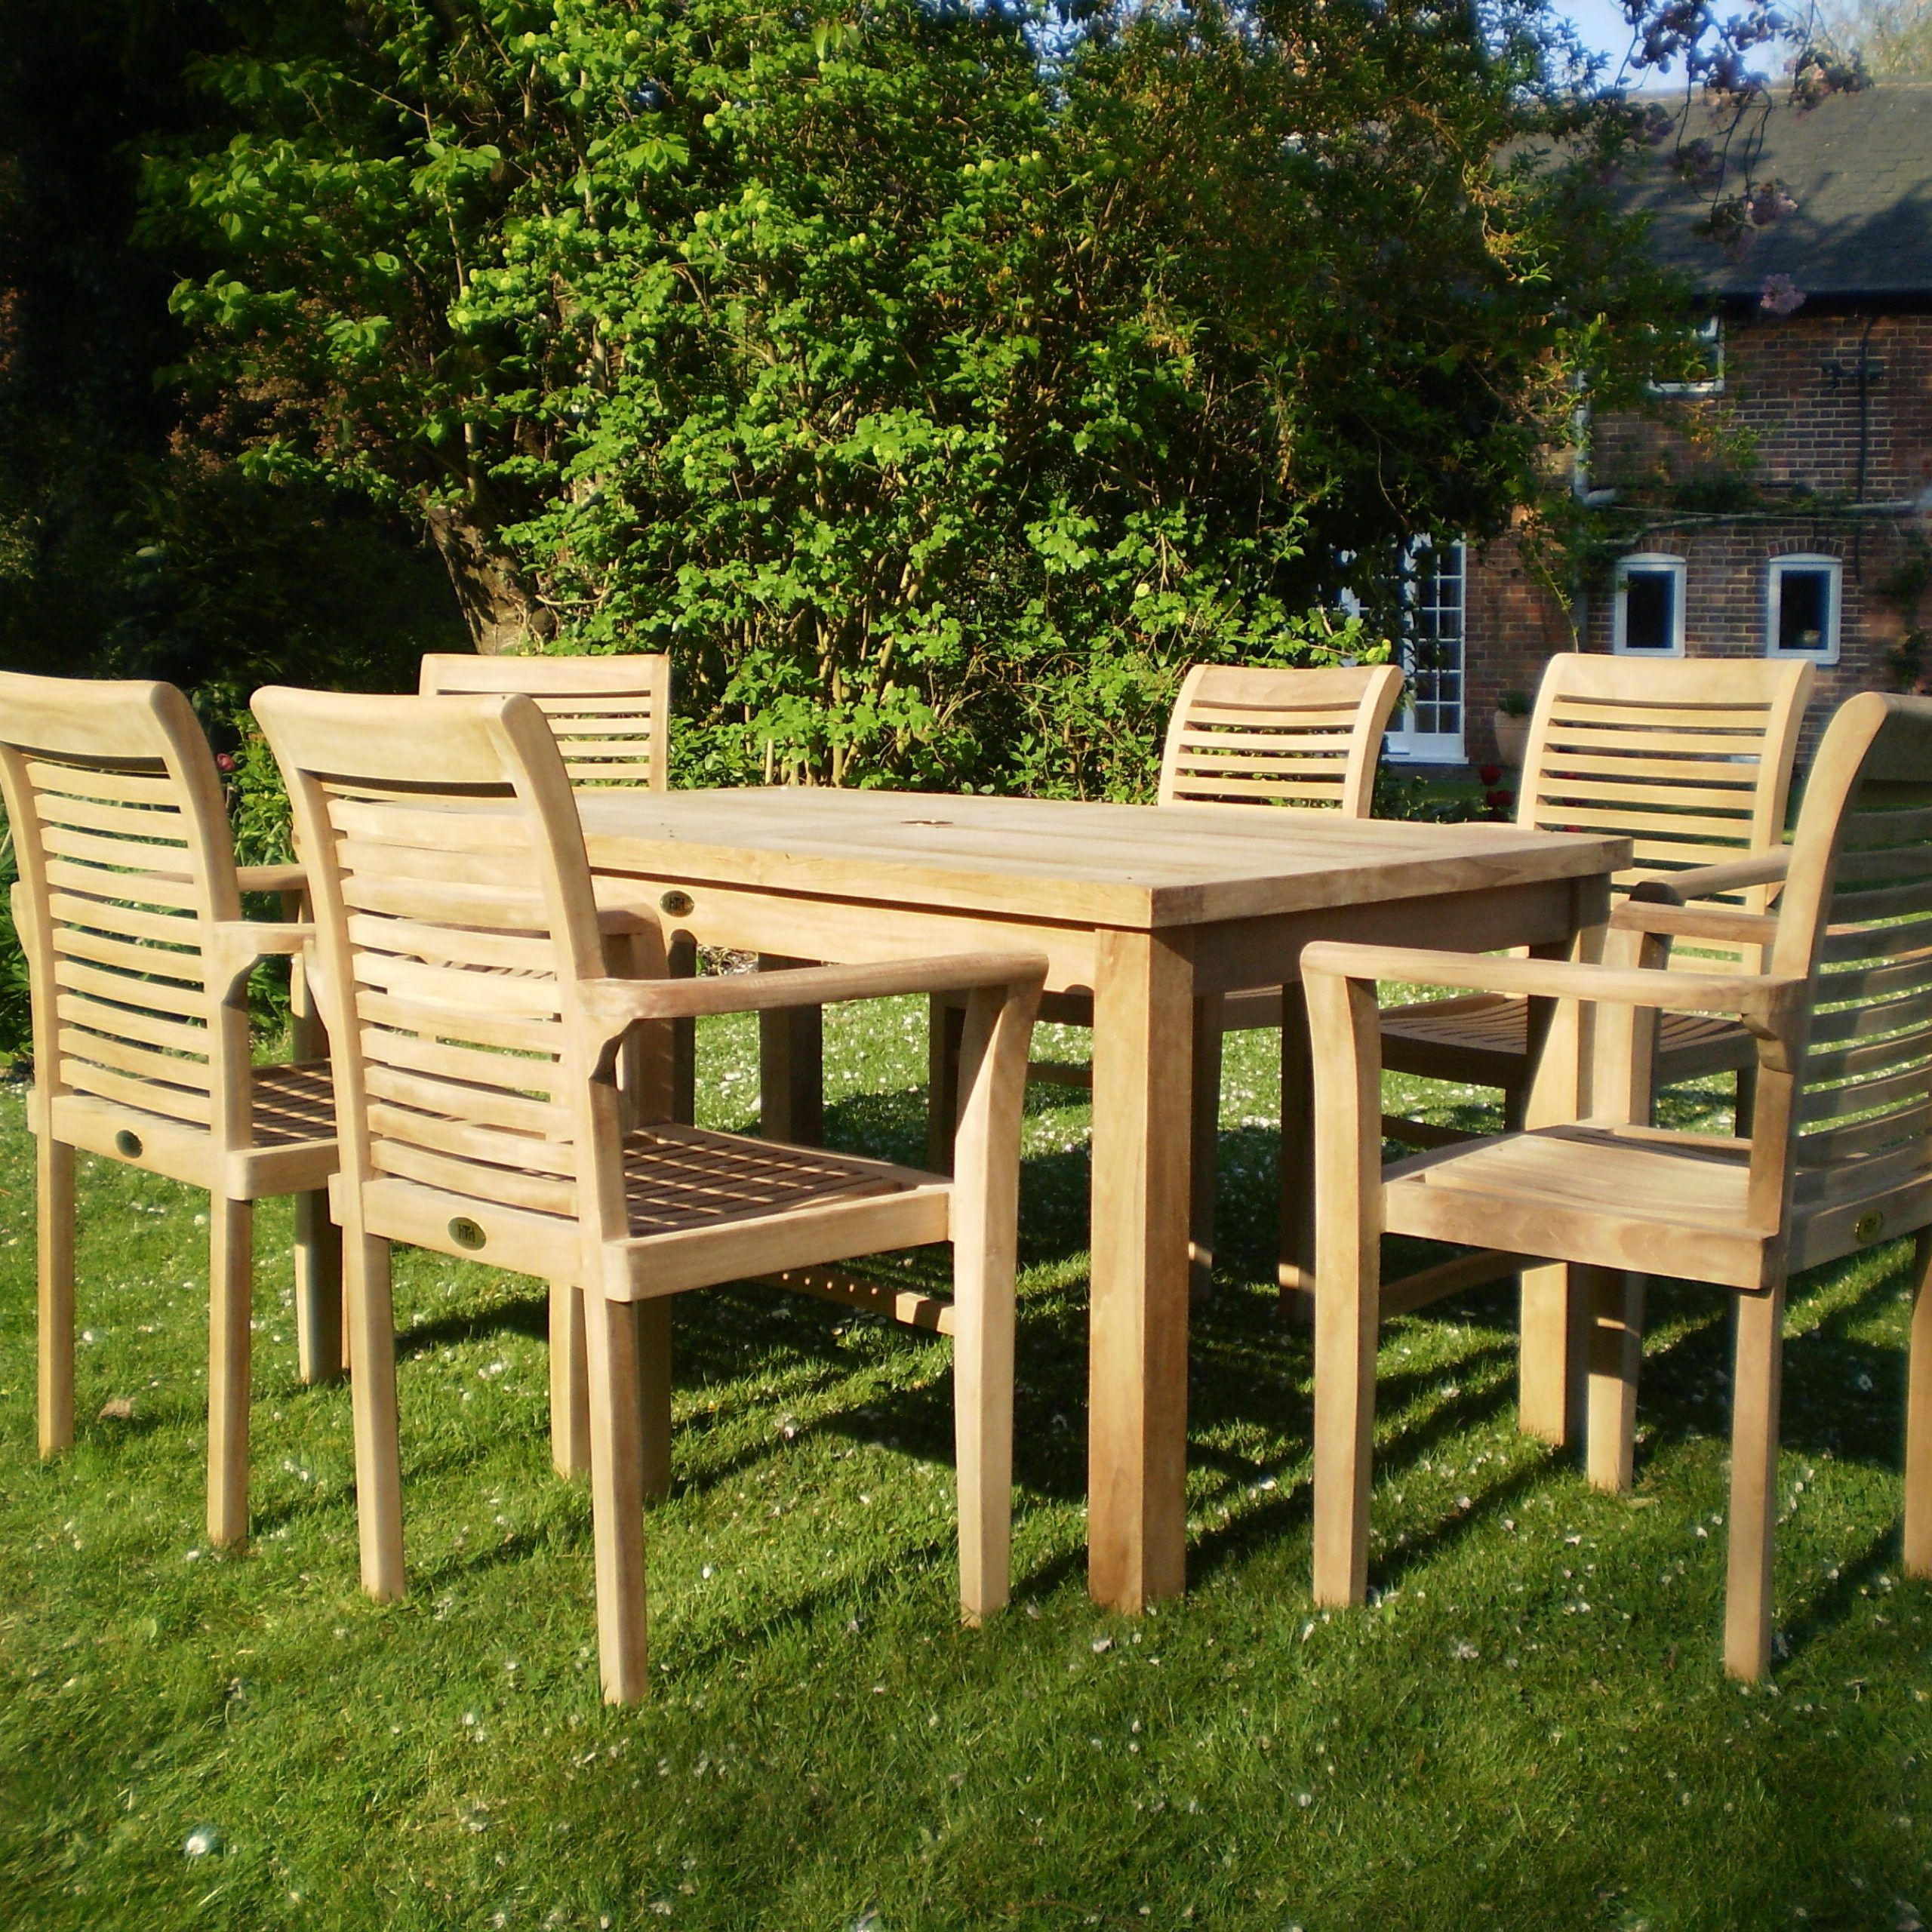 Teak Outdoor Loungers Sets Intended For Trendy Teak Patio Furniture – Chairs And Tables Uk – Teak Garden Furniture (View 6 of 15)